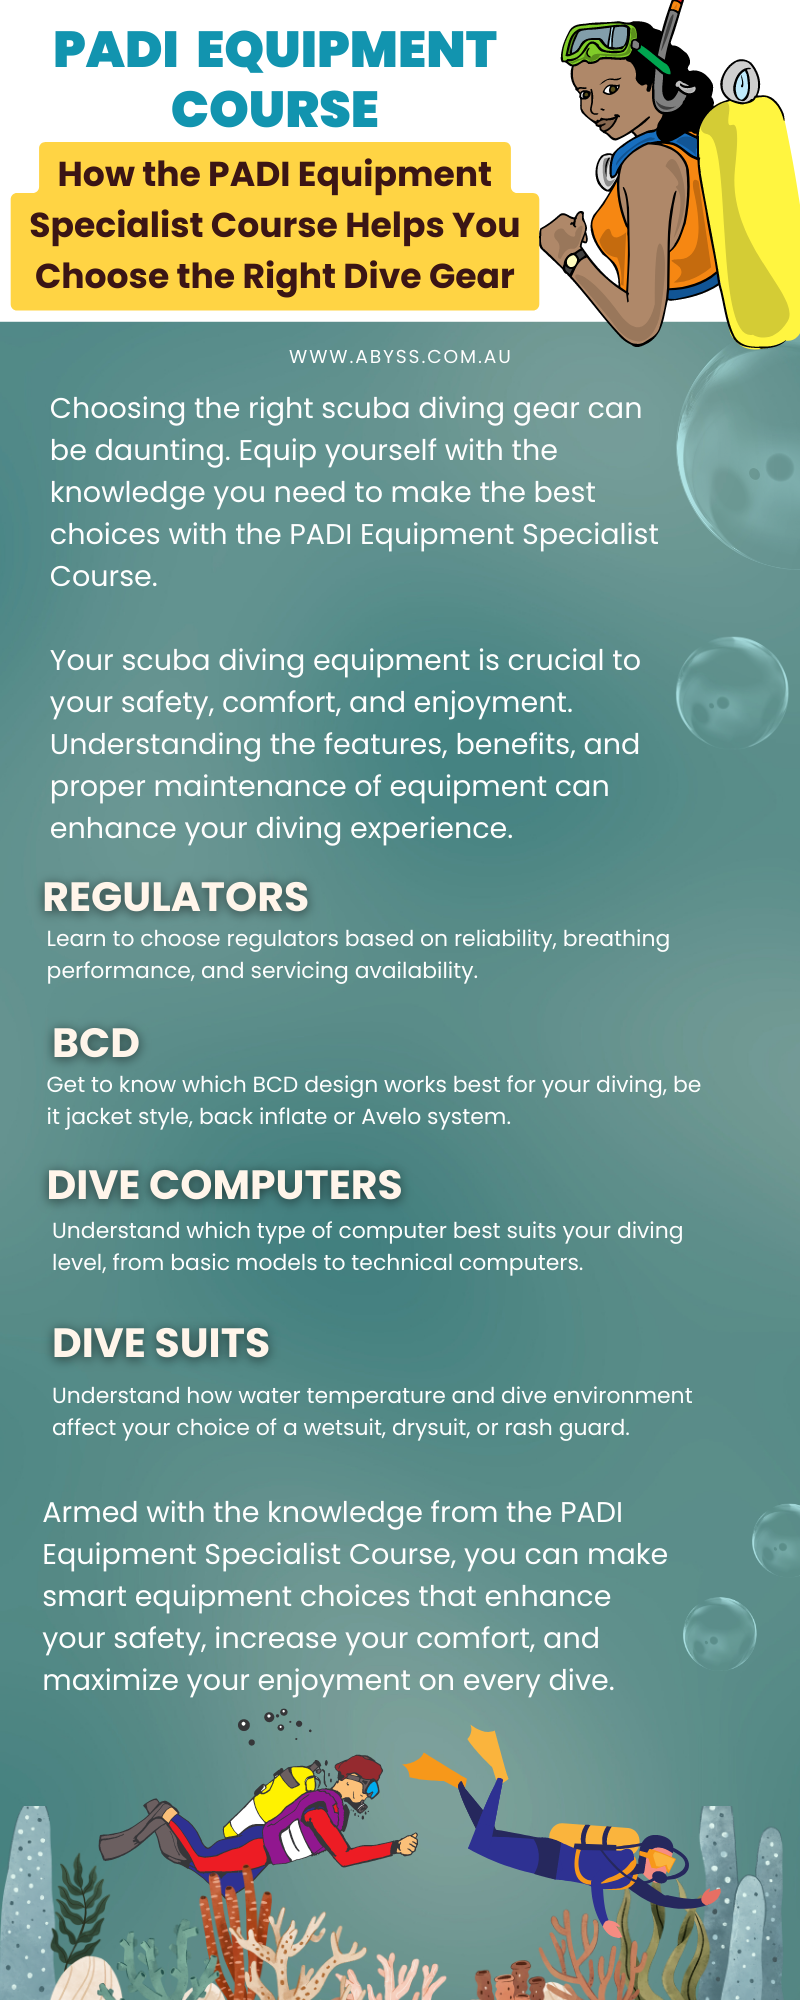 How an Equipment Course Helps You with your dive equipment purchace